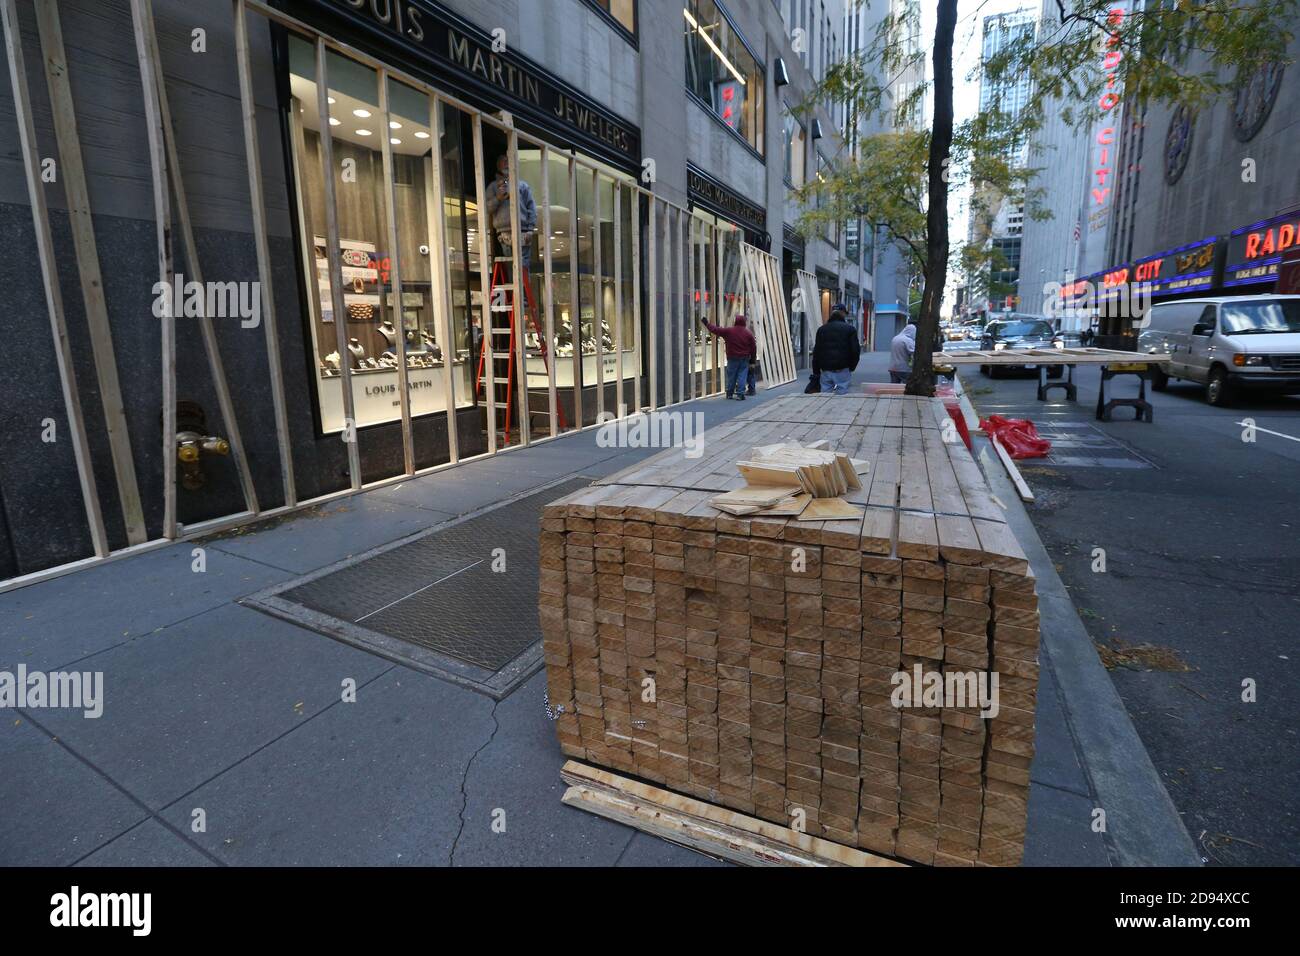 New York, NY, USA. 2nd Nov, 2020. Nov 2, 2020 : New York Stores prepare for possible unrest surrounding election day. Workers board up Louis Martin Jewelers to prevent looting and vandalism. Credit: Dan Herrick/ZUMA Wire/Alamy Live News Stock Photo